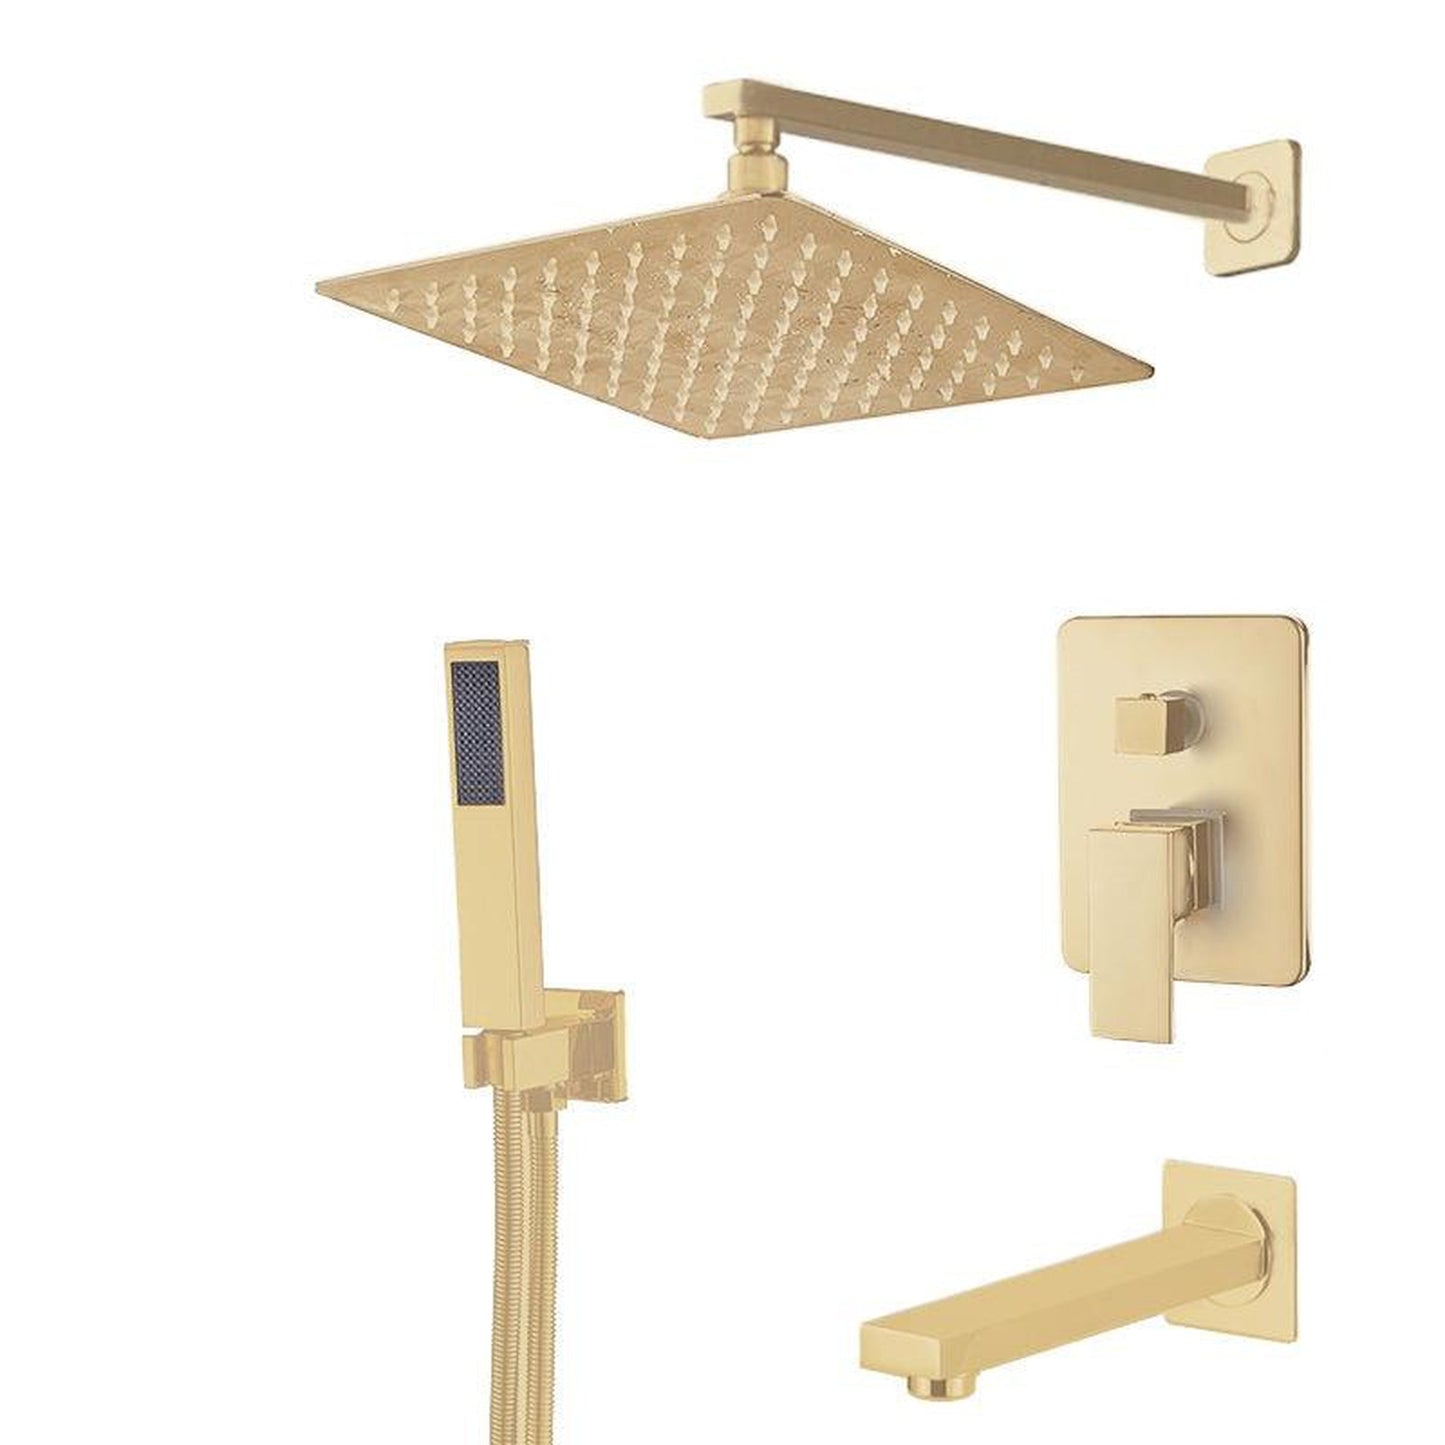 FontanaShowers Verona Creative Luxury 10" Gold Square Wall-Mounted 3-Way Single Handle Mixer Shower System With Hand Shower and Tub Spout